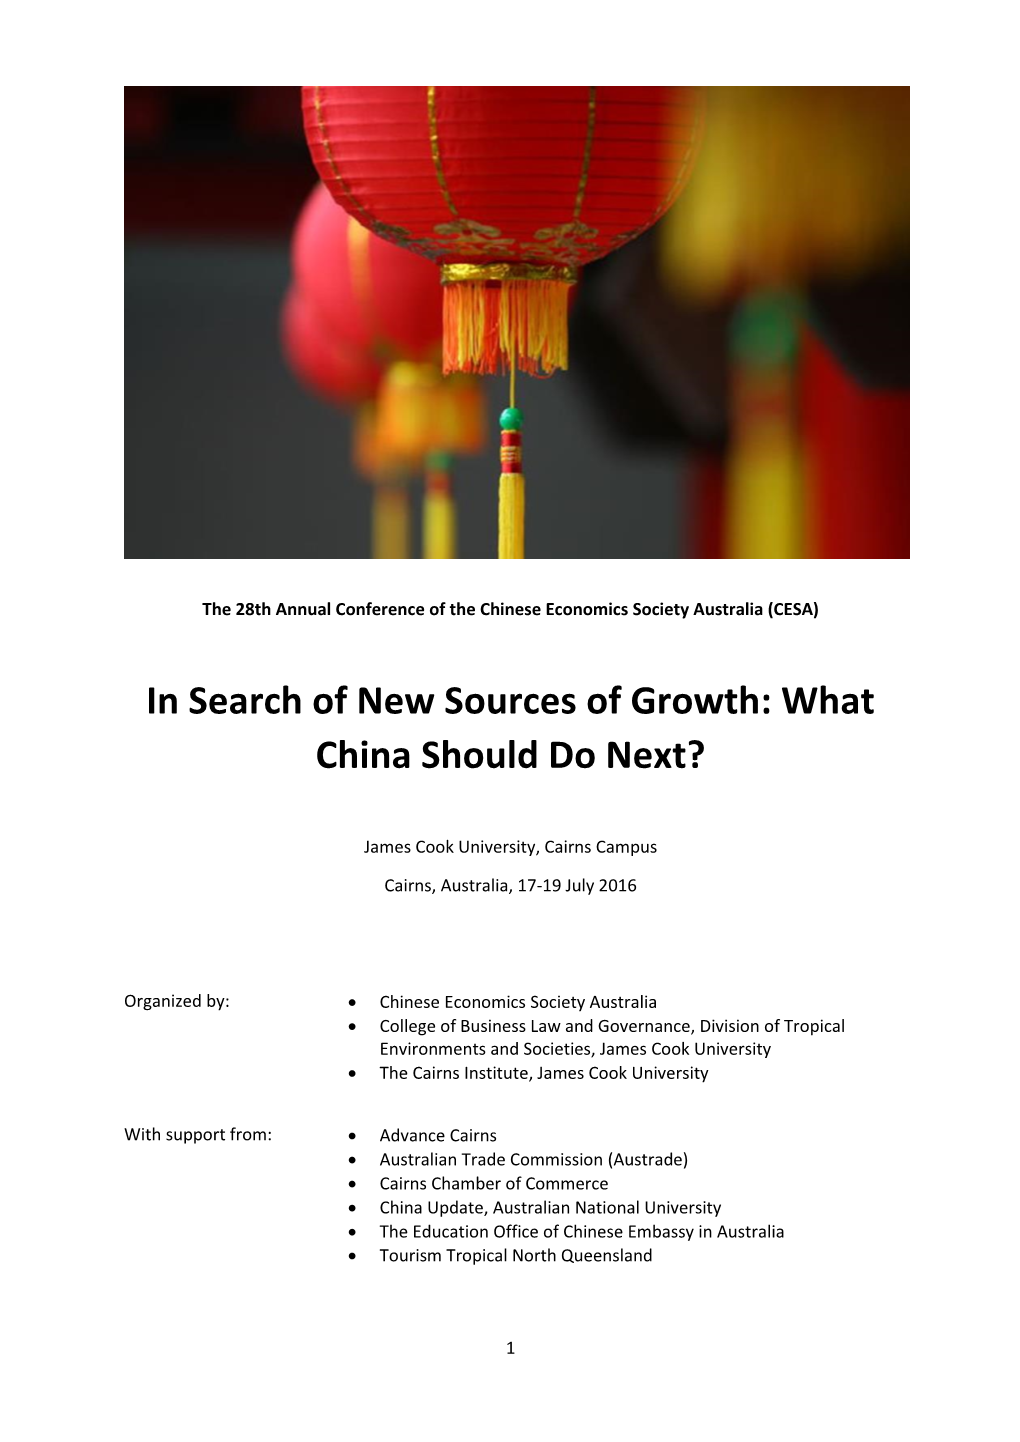 In Search of New Sources of Growth: What China Should Do Next?